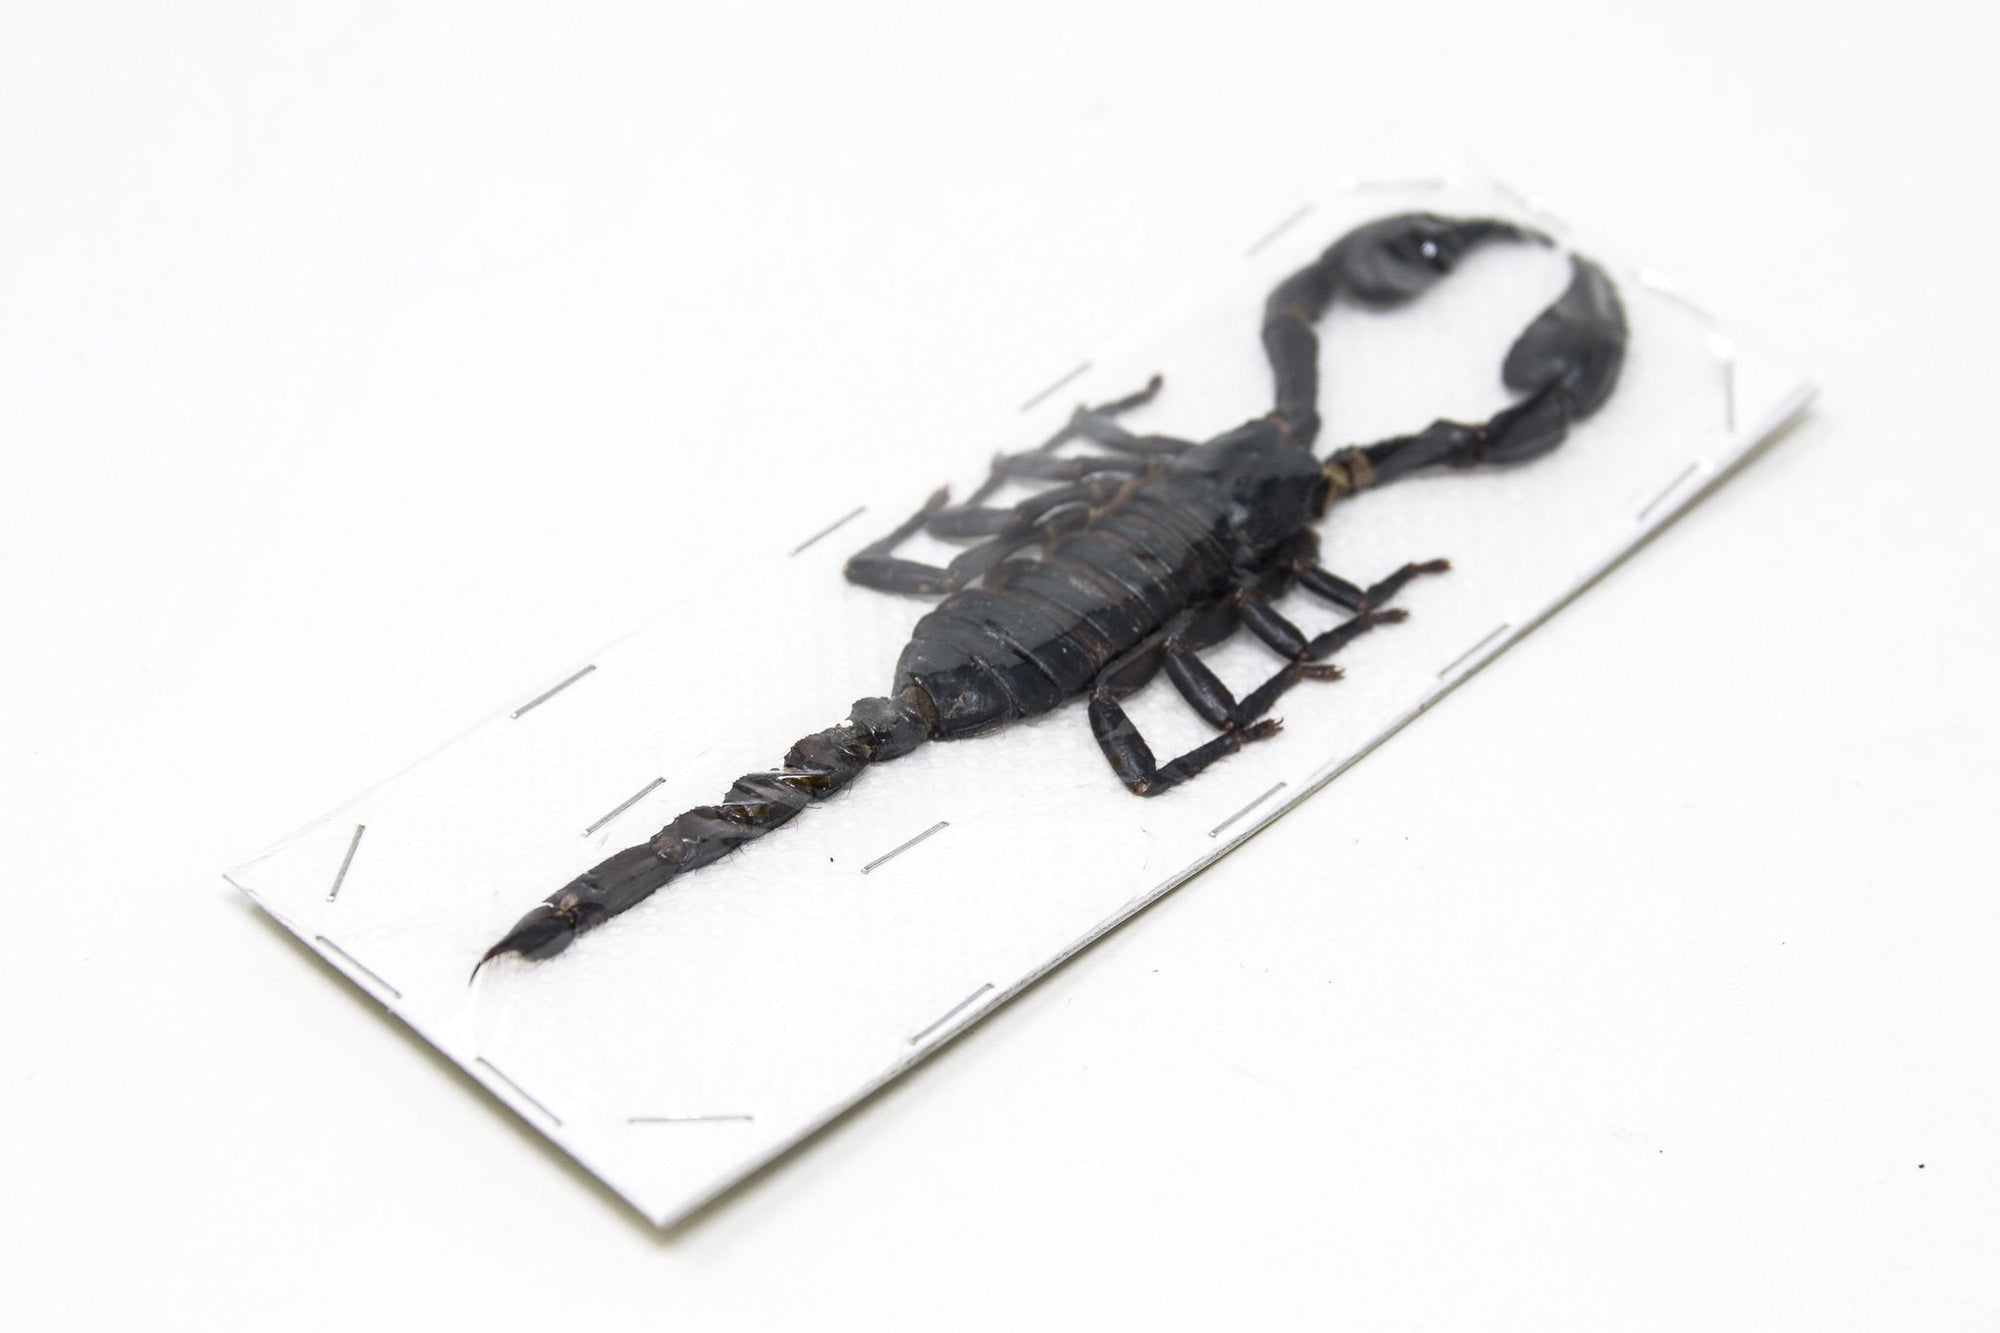 WHOLESALE 100 x Heterometrus spinifer | Giant Forest Scorpions | A1 Unmounted Specimens